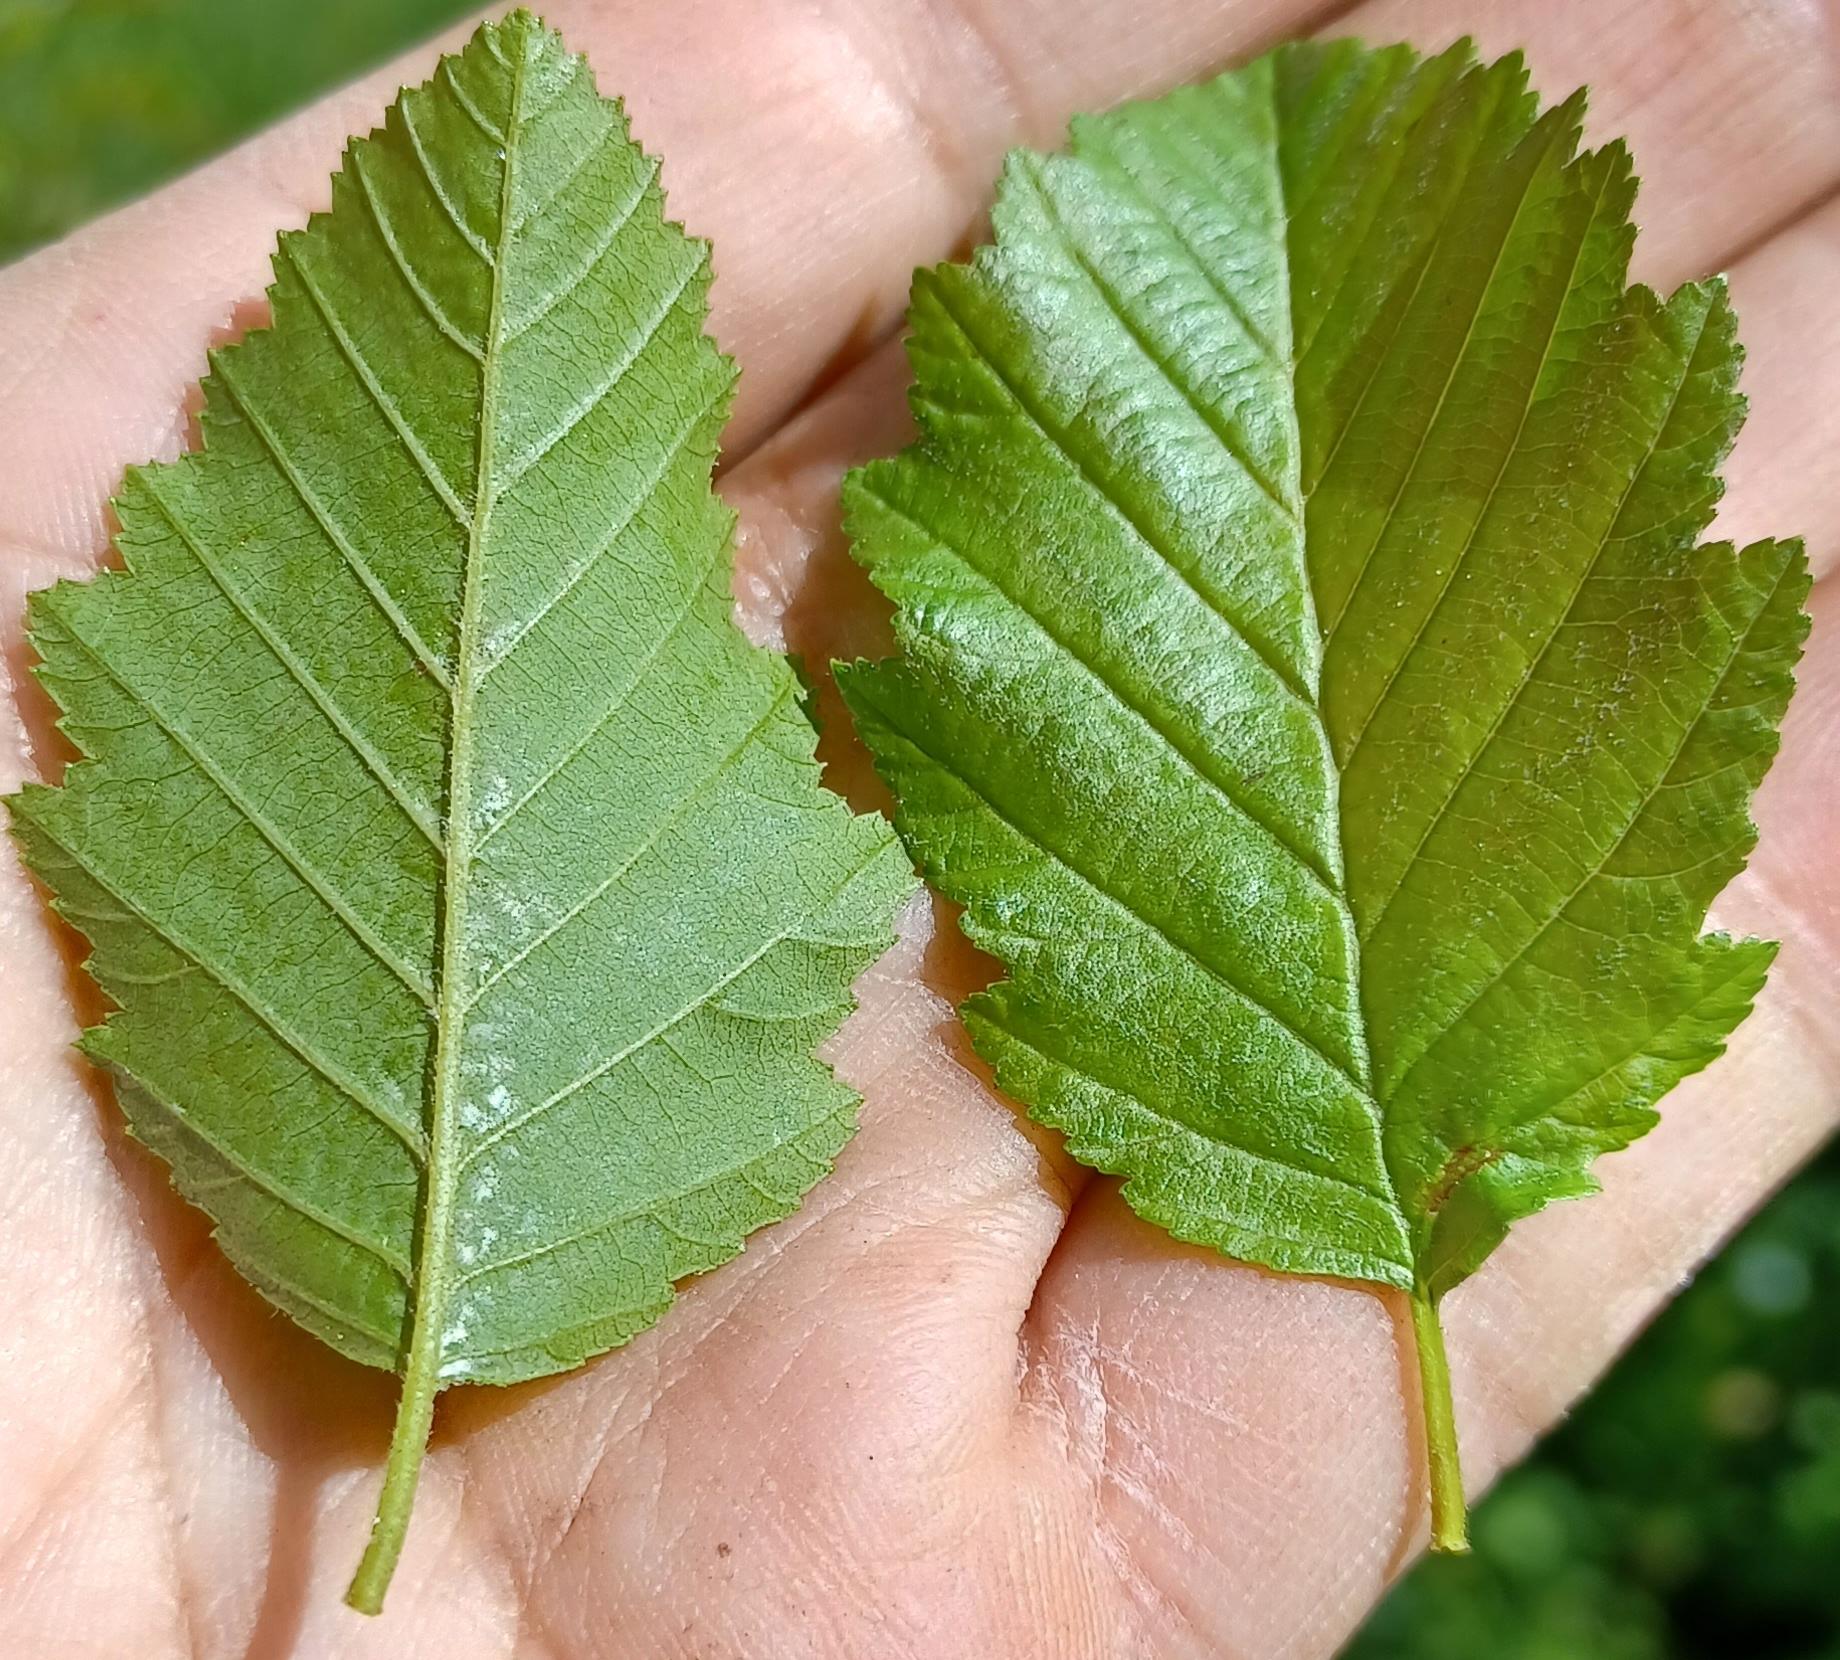 Alnus viridis leaves viewed from below (left) and above (right).